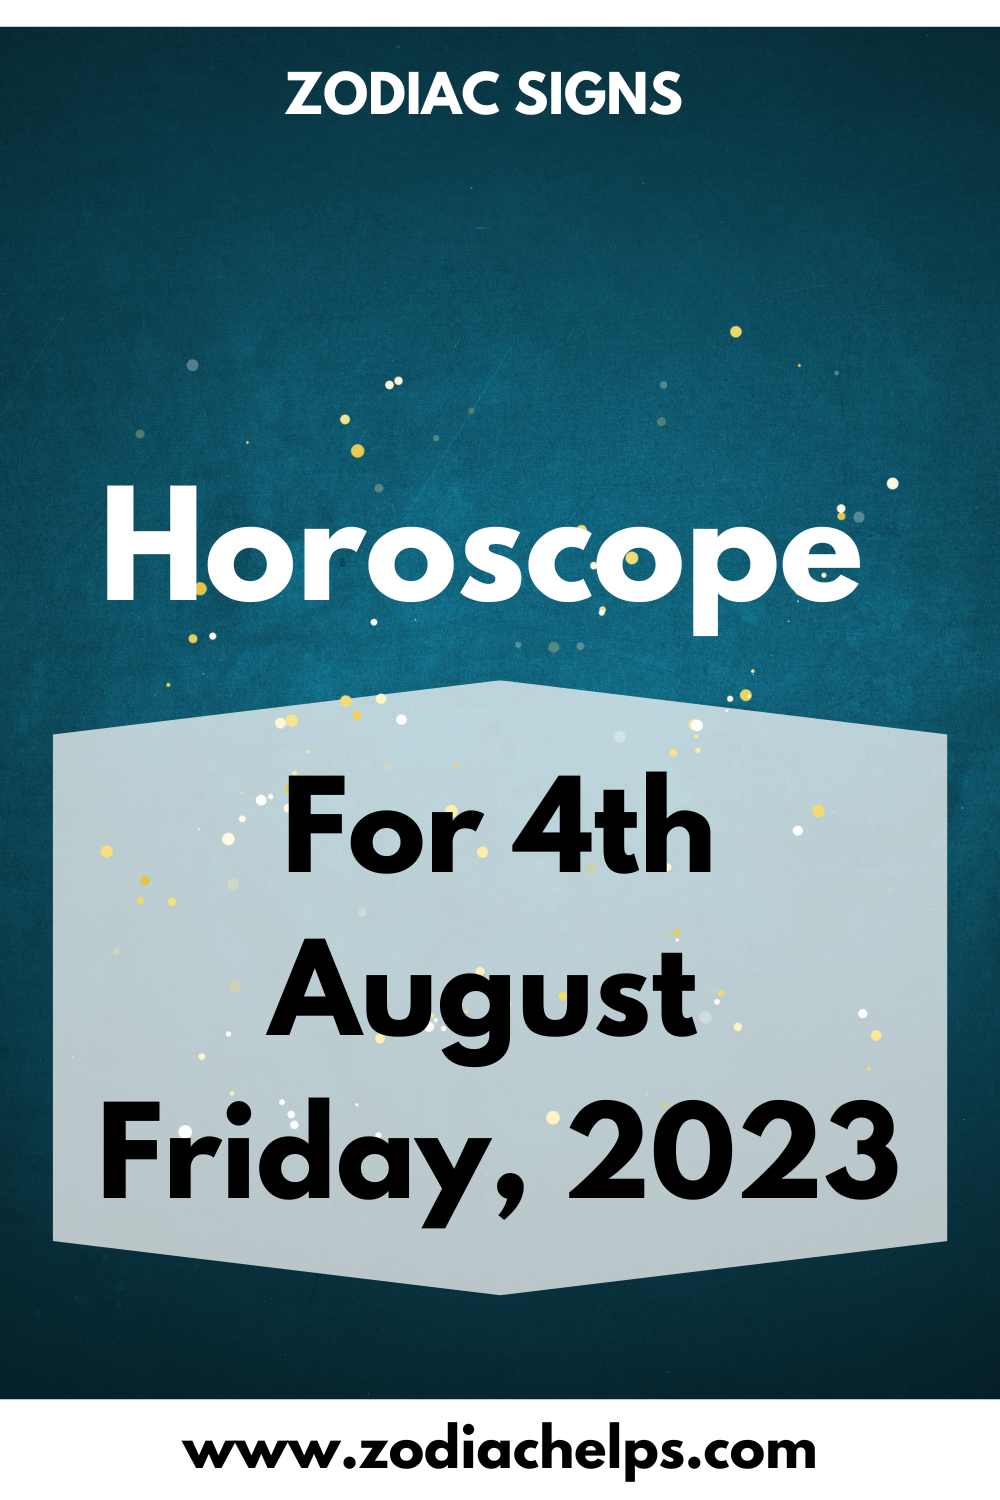 Horoscope for 4th August Friday, 2023